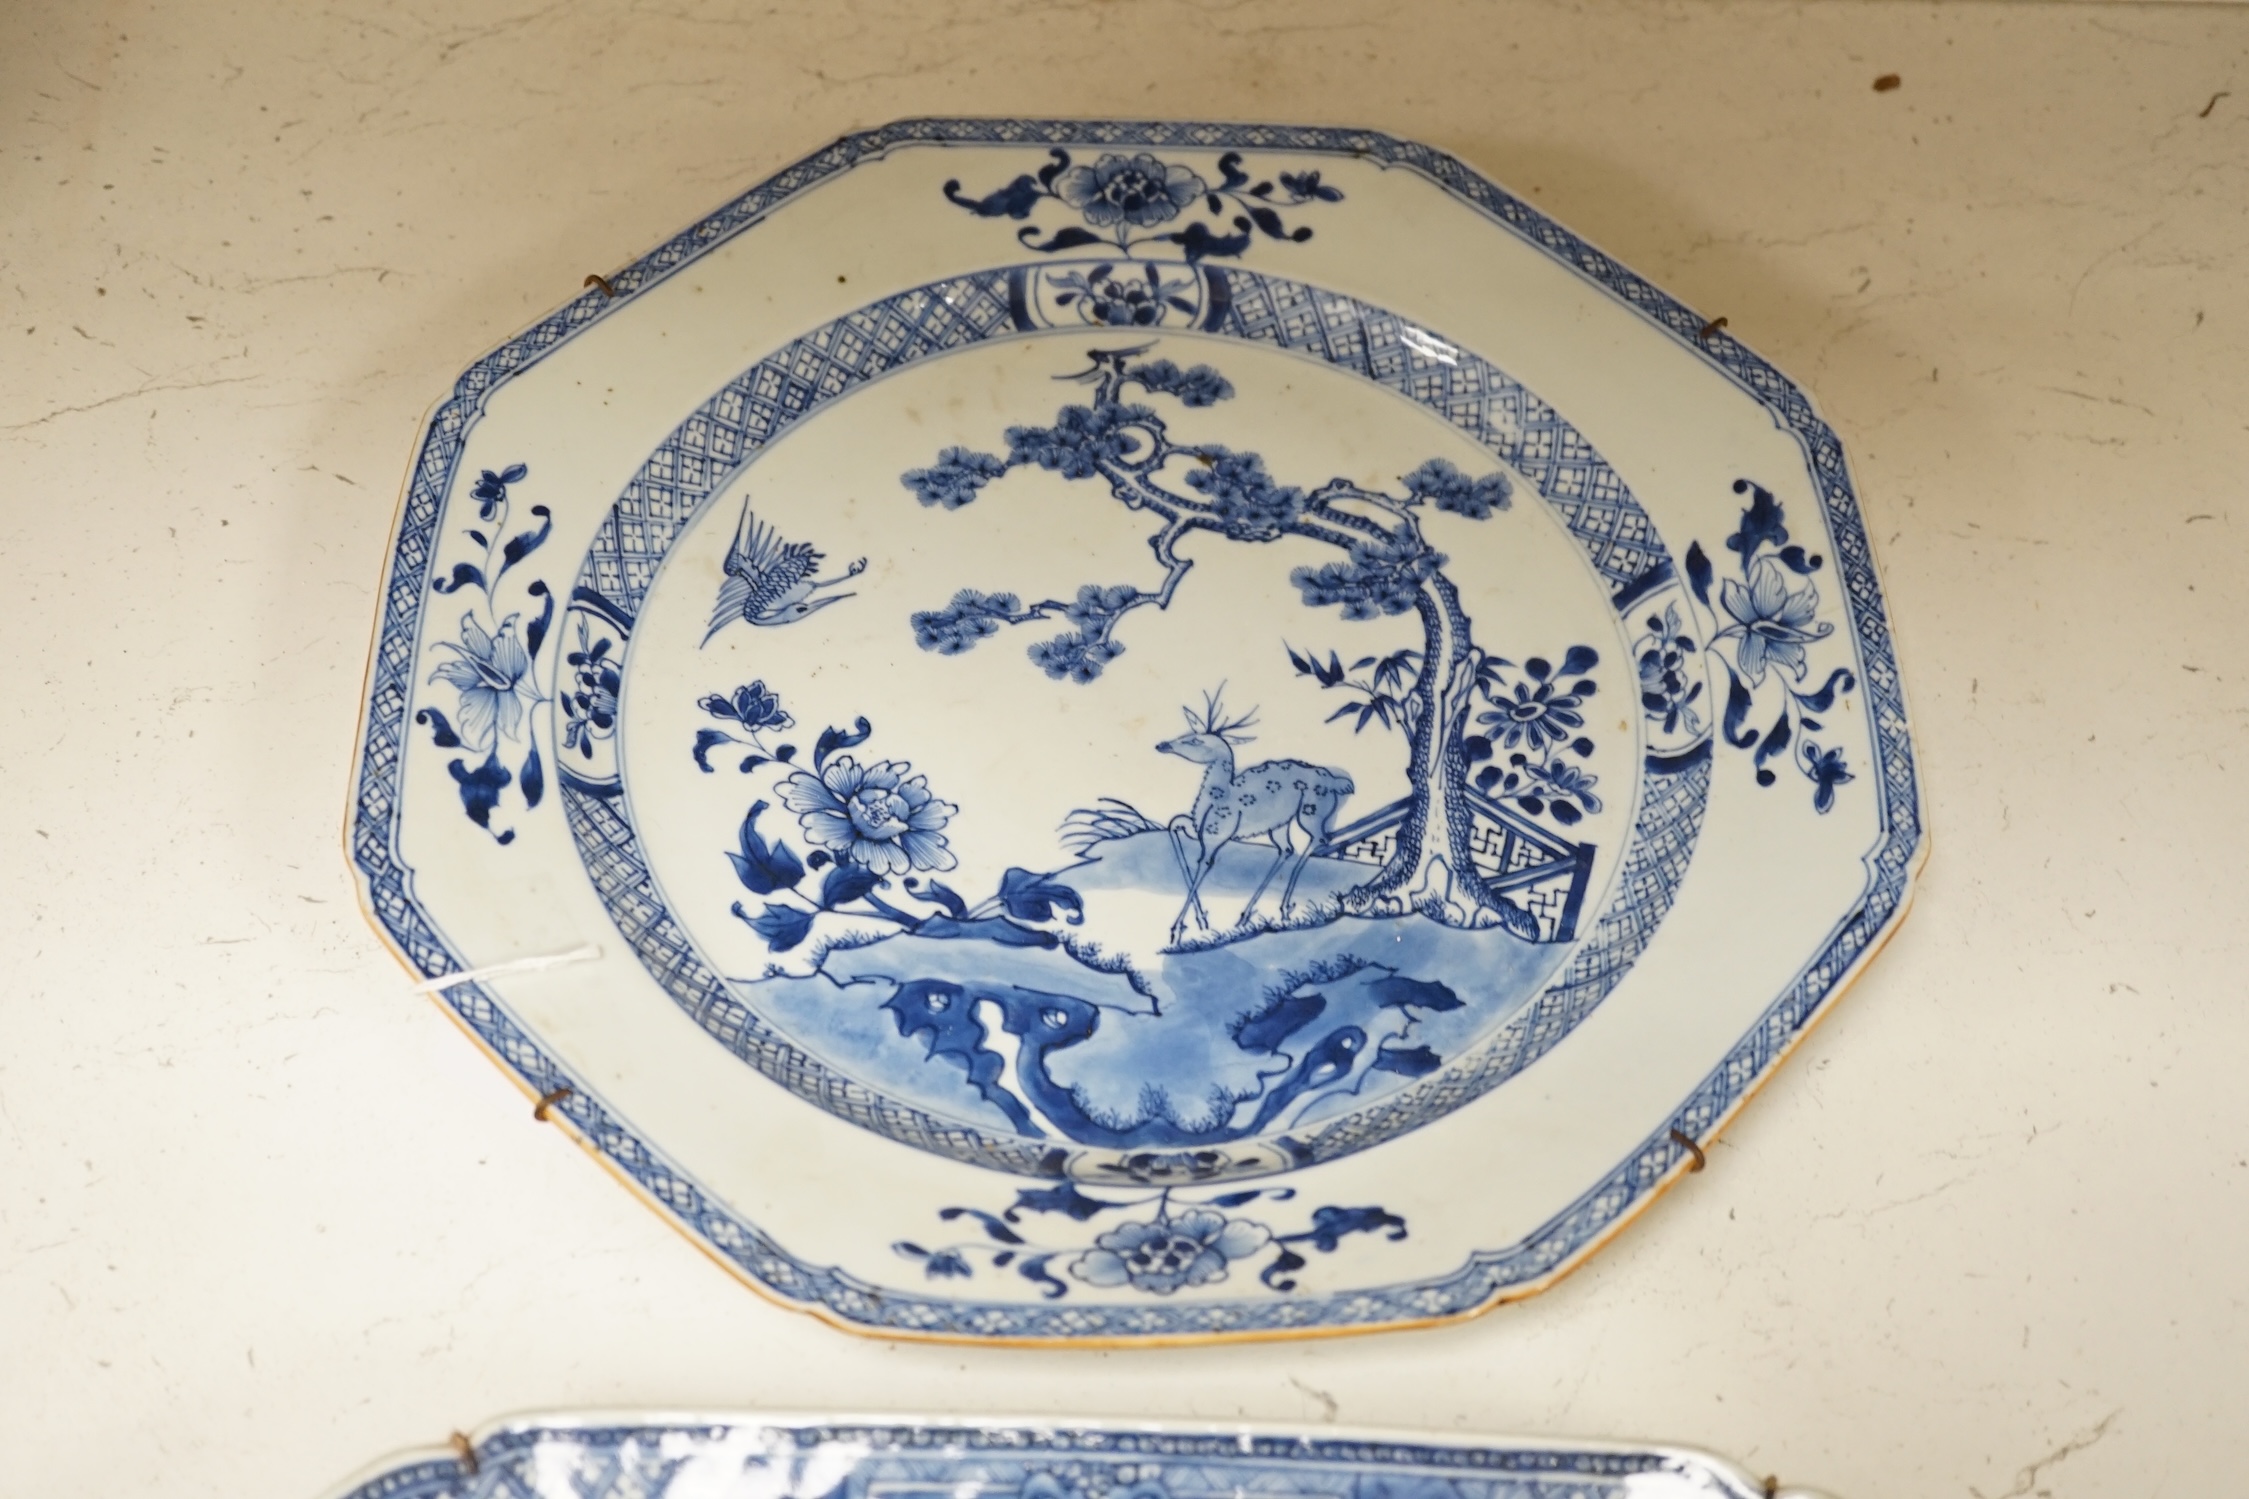 Two 18th century Chinese blue and white dishes, largest 44.5cm long. Condition - fair